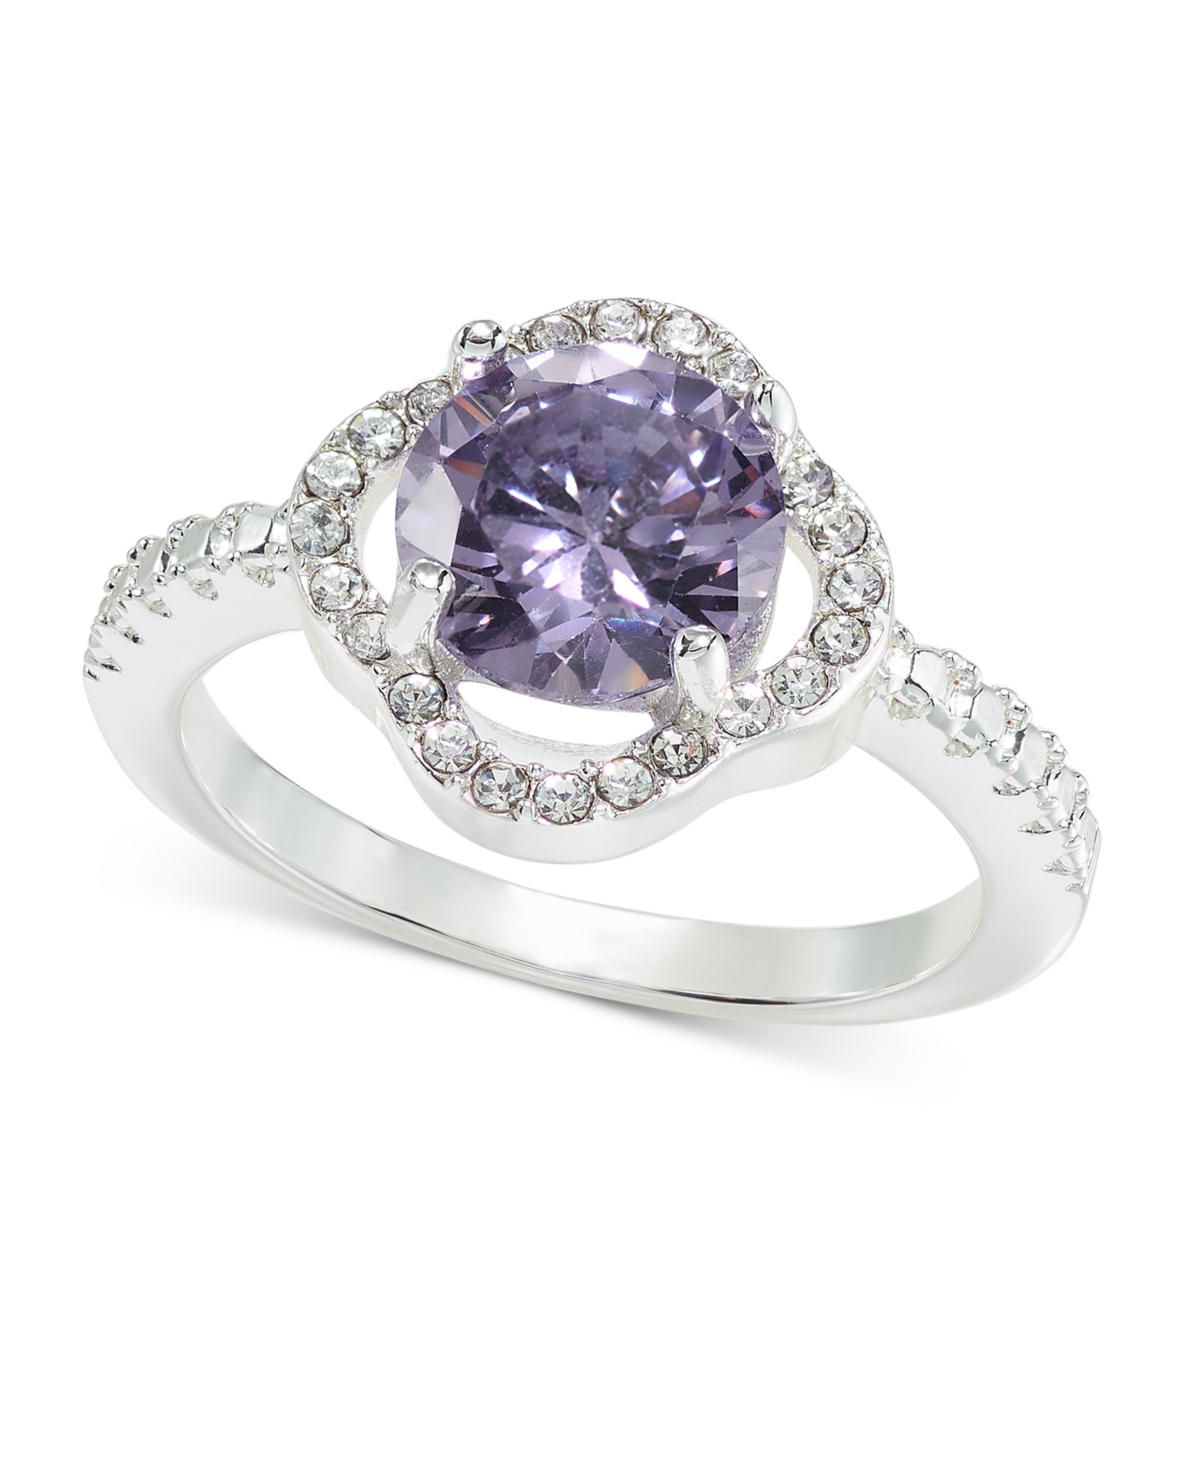 Silver-Tone Pave & Purple Cubic Zirconia Flower Ring, Created for Macy's - Silver